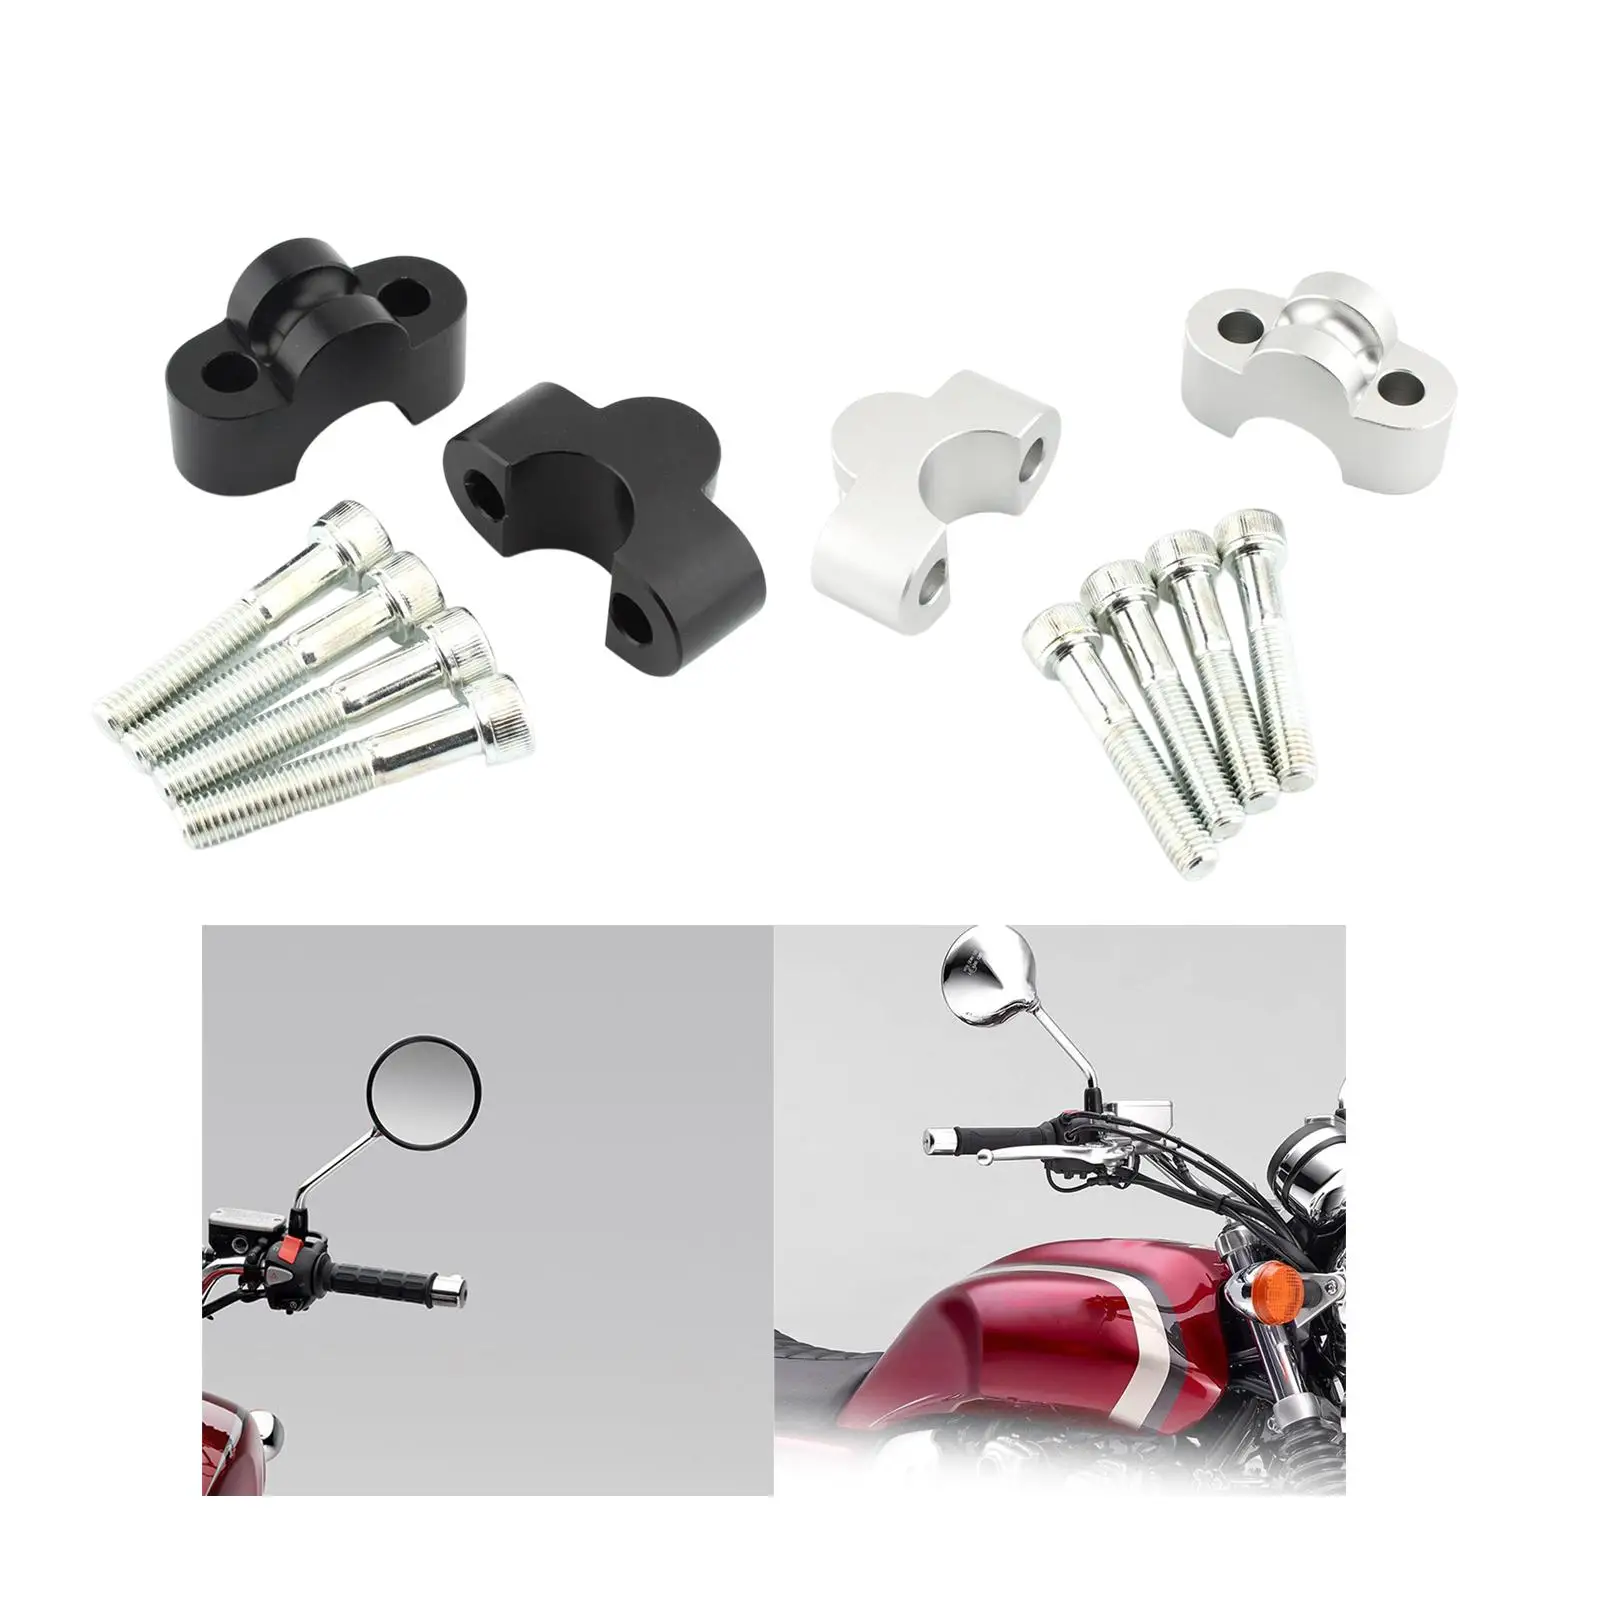 2 Pieces Motorcycle Handlebar Riser Clamp for RS EX